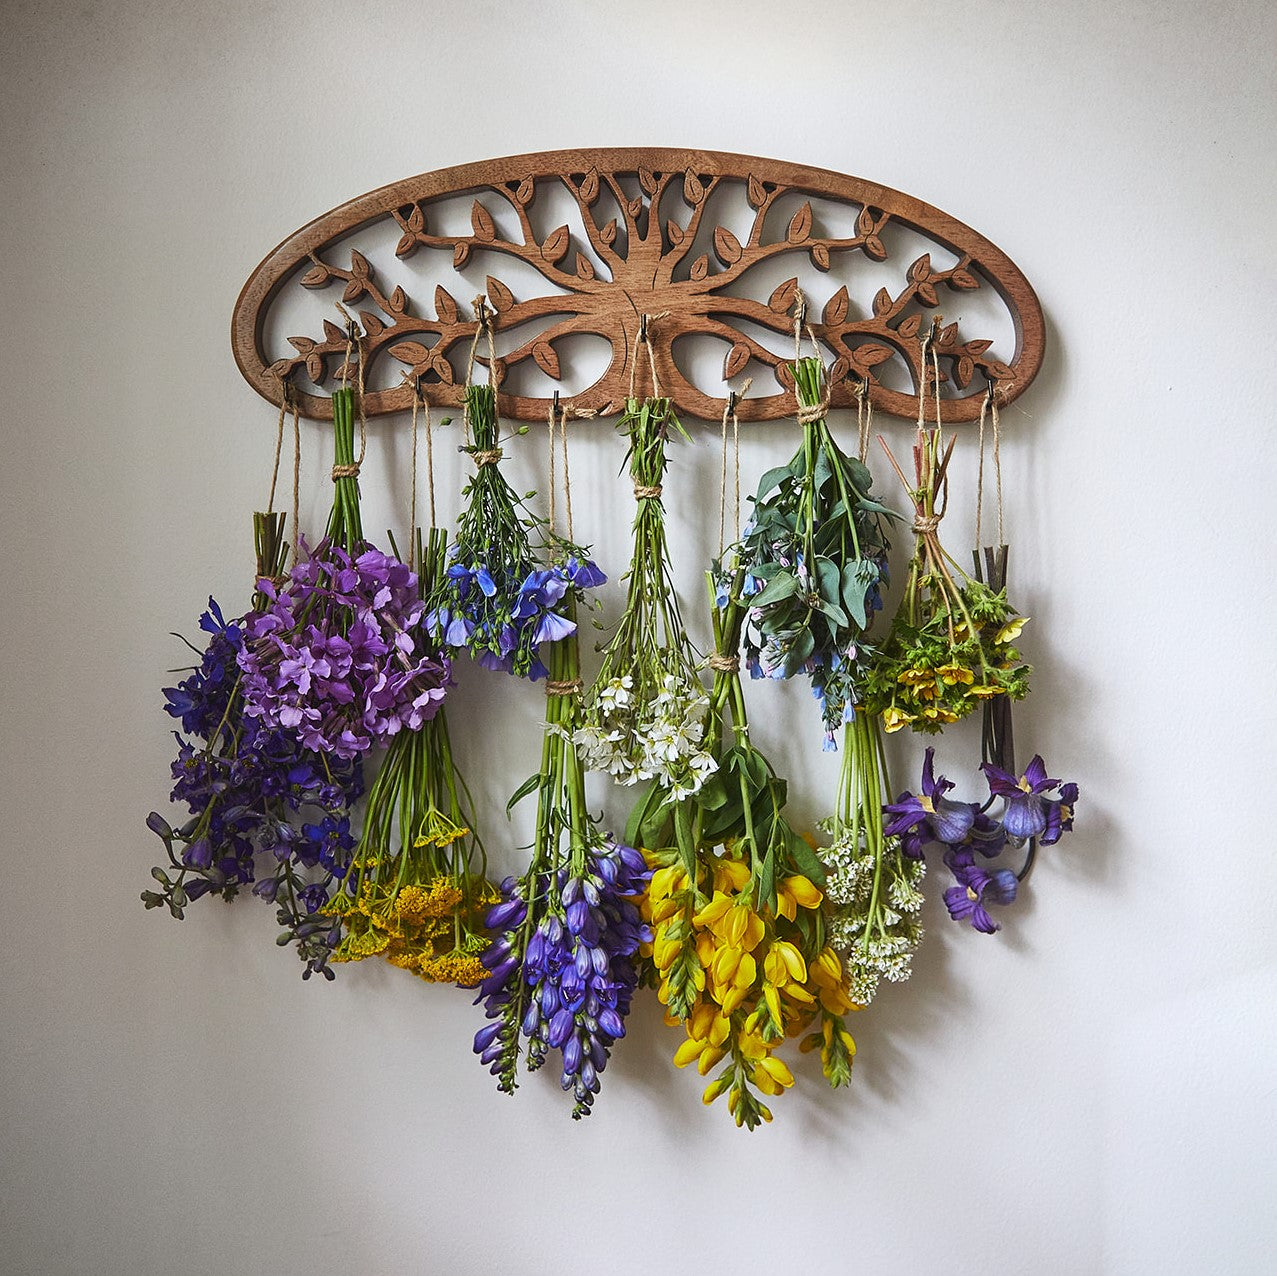 DIY Herb Drying Rack for Hang Drying Herbs and Flowers - The